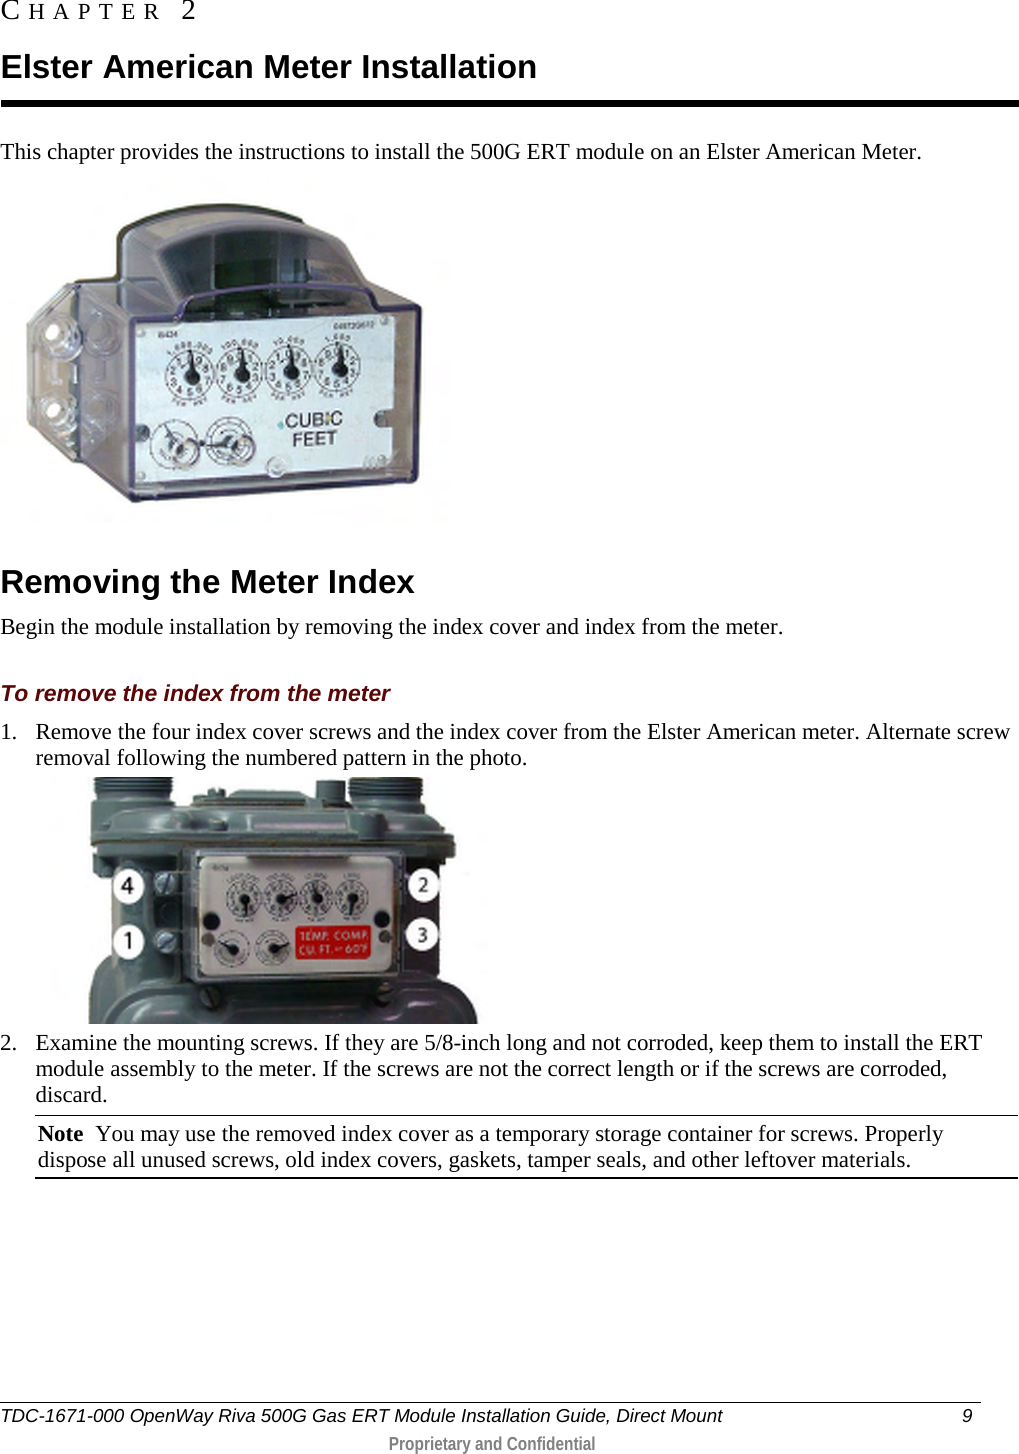  This chapter provides the instructions to install the 500G ERT module on an Elster American Meter.   Removing the Meter Index Begin the module installation by removing the index cover and index from the meter.  To remove the index from the meter 1. Remove the four index cover screws and the index cover from the Elster American meter. Alternate screw removal following the numbered pattern in the photo.   2. Examine the mounting screws. If they are 5/8-inch long and not corroded, keep them to install the ERT module assembly to the meter. If the screws are not the correct length or if the screws are corroded, discard.  Note  You may use the removed index cover as a temporary storage container for screws. Properly dispose all unused screws, old index covers, gaskets, tamper seals, and other leftover materials.  CHAPTER  2  Elster American Meter Installation TDC-1671-000 OpenWay Riva 500G Gas ERT Module Installation Guide, Direct Mount  9   Proprietary and Confidential  